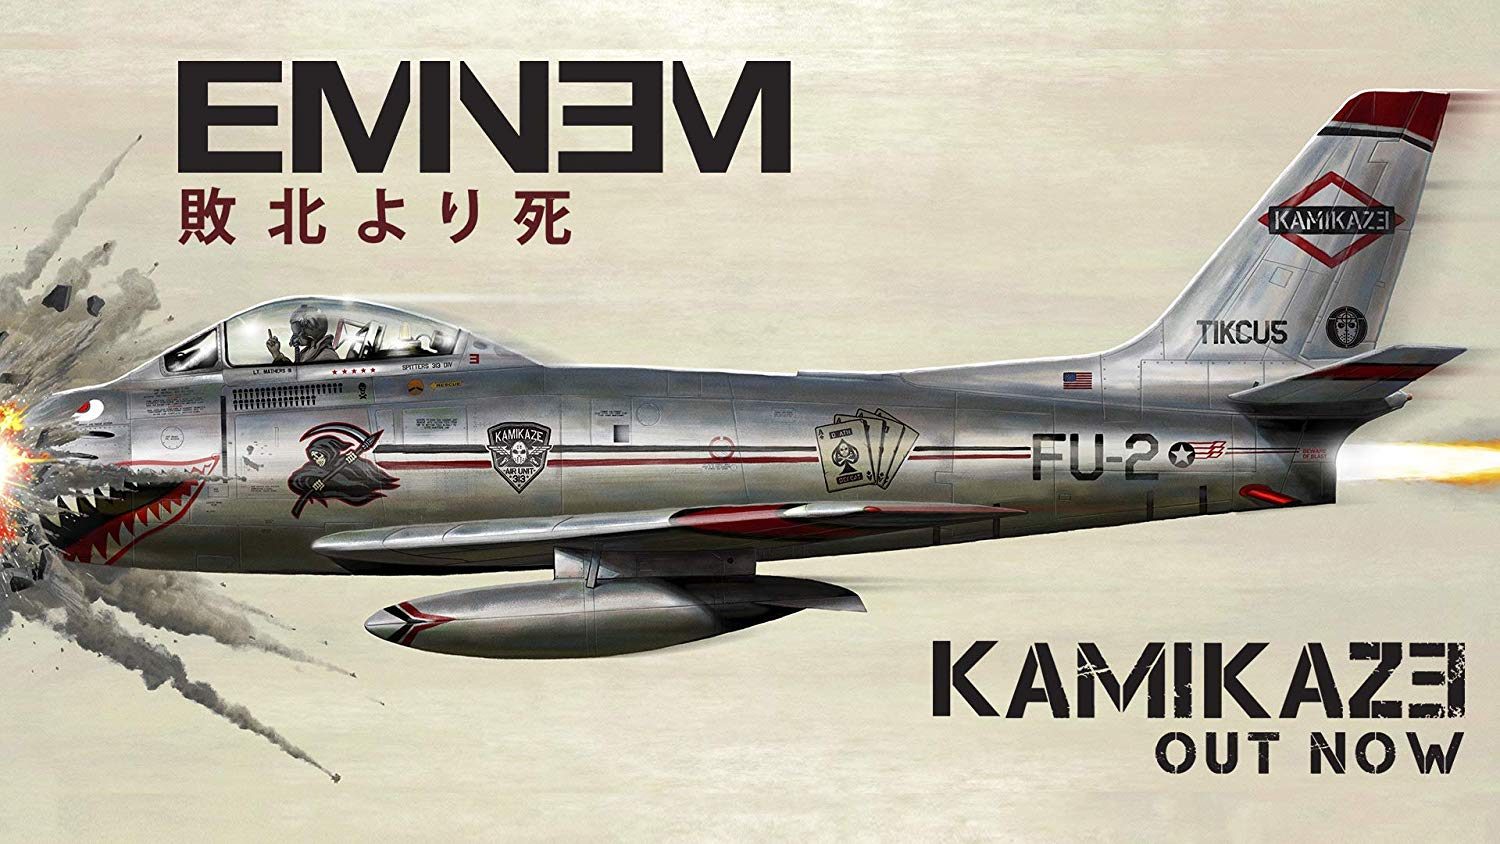 Kamikaze Eminem Songs Reviews and Ratings